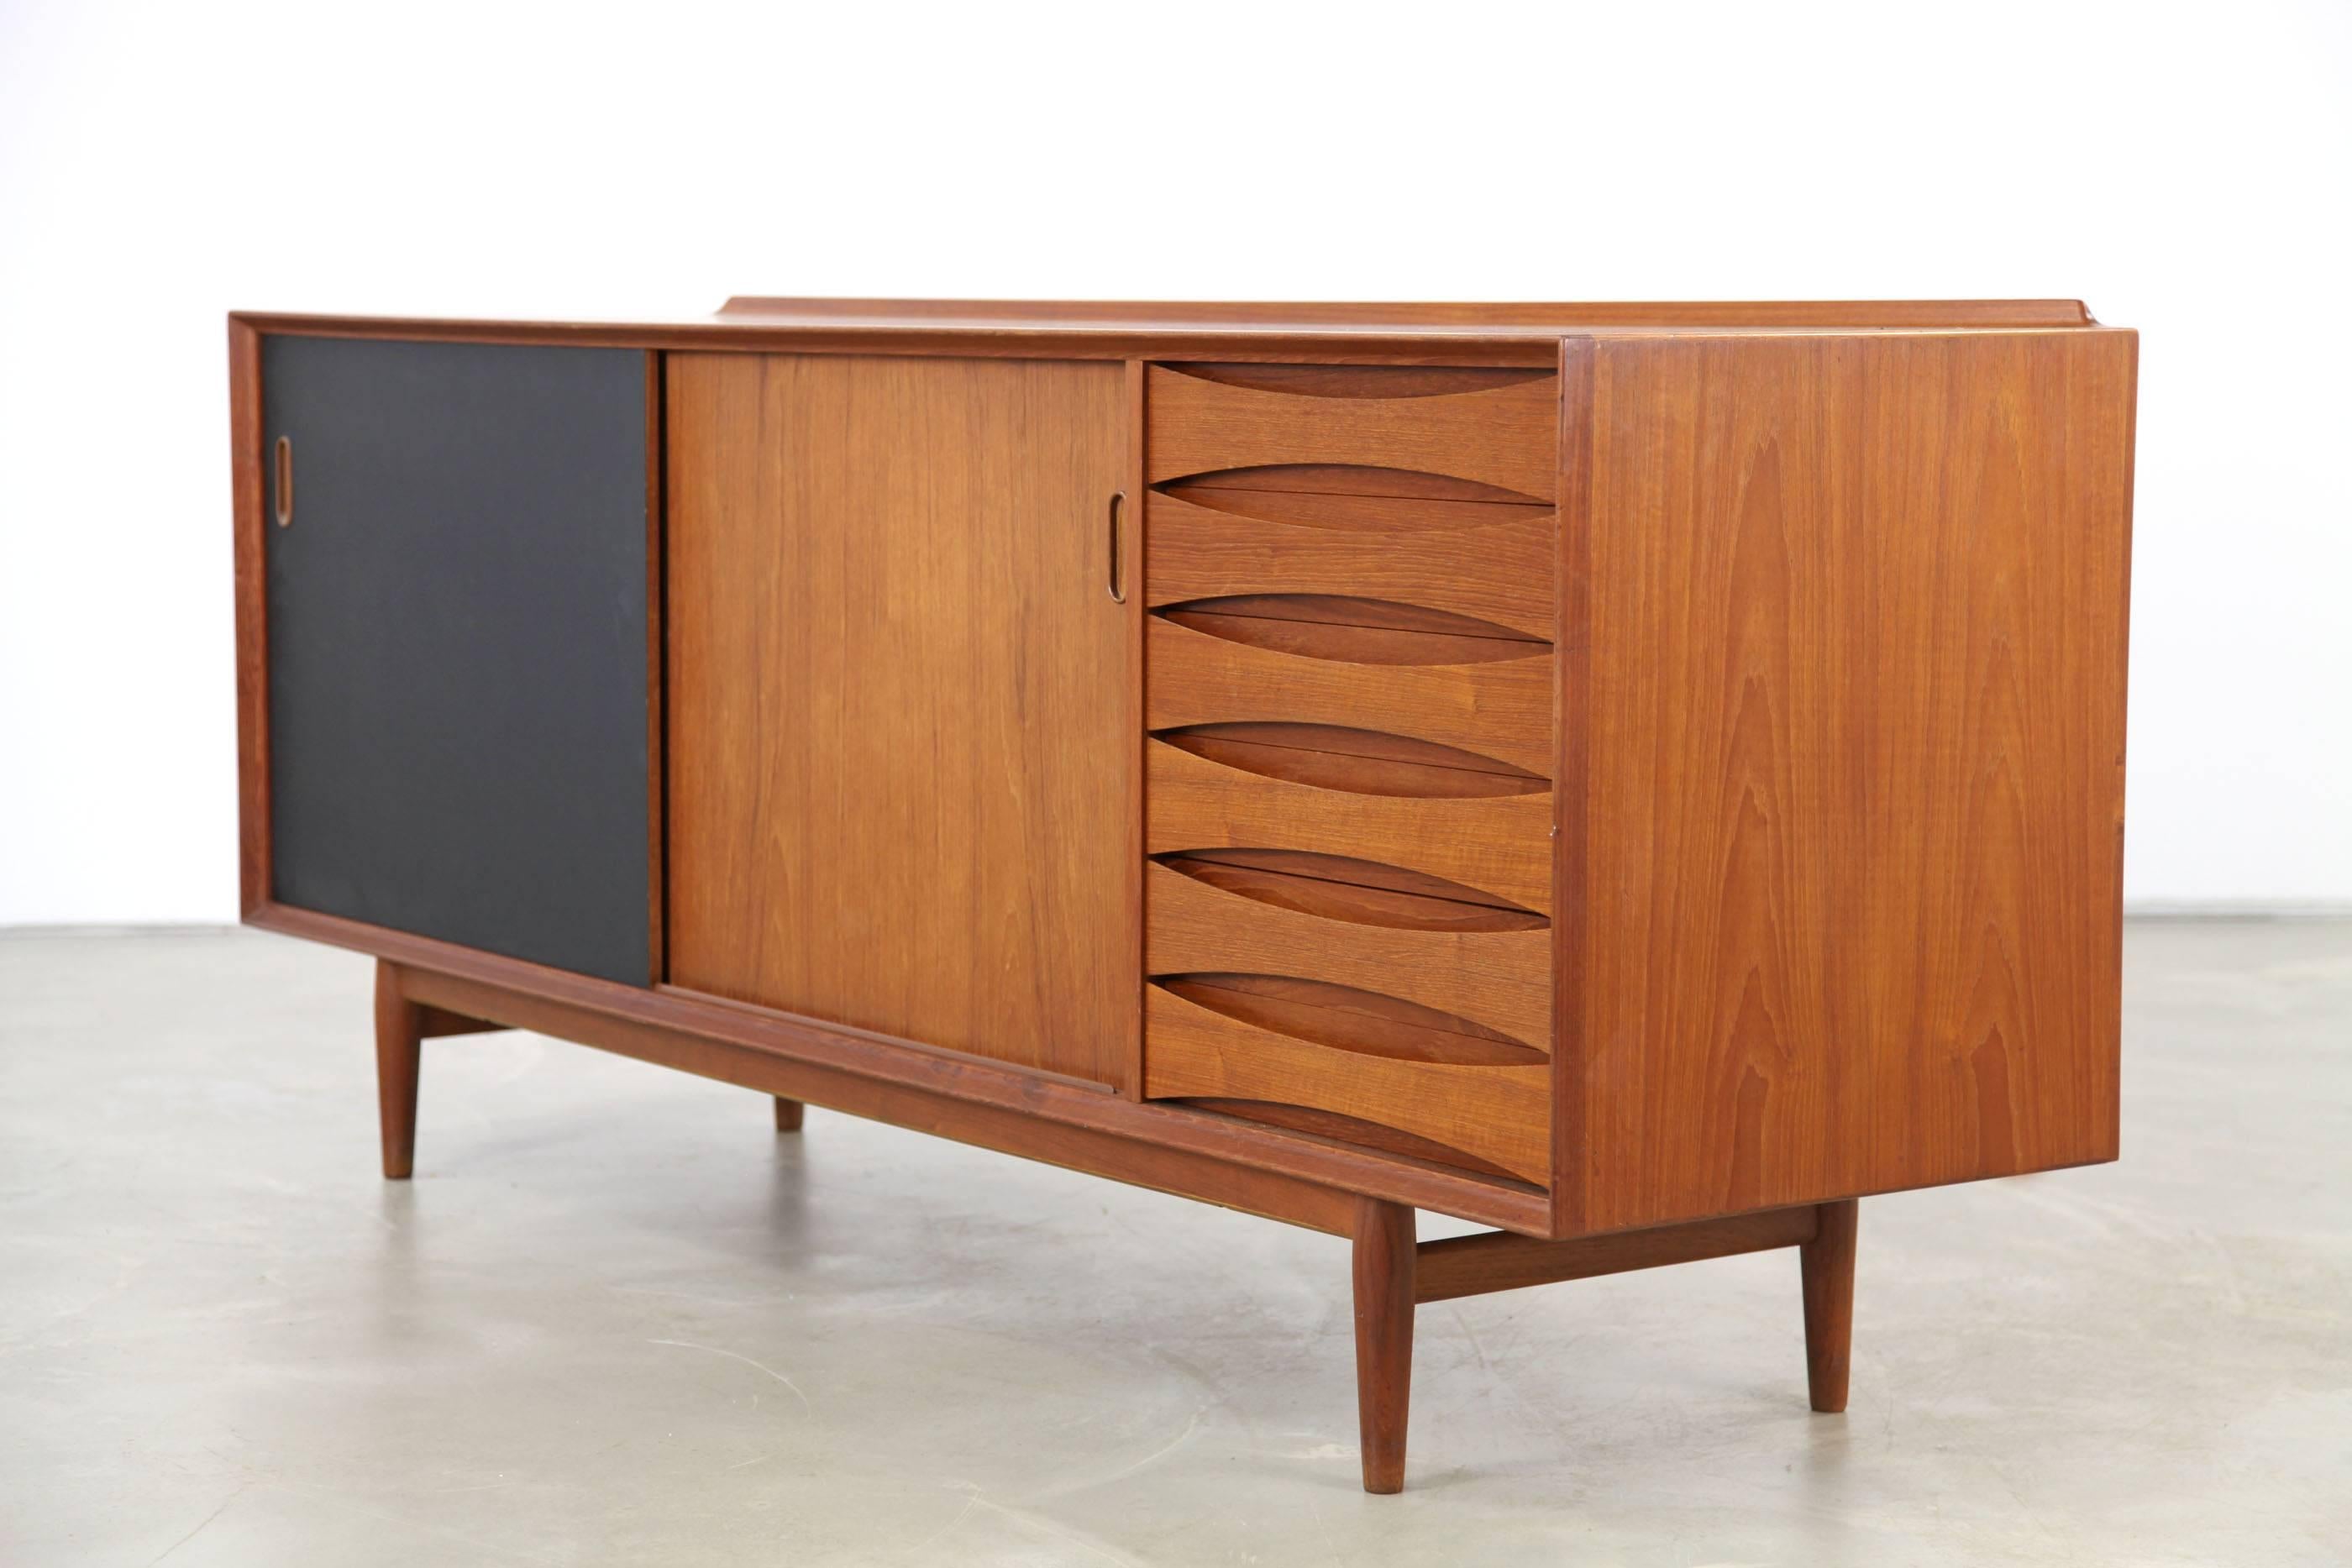 This iconic sideboard by Arne Vodder features a beautiful teak veneer and reversible doors, that are matte black on one side and teak veneered on the other. It can be used as a room divider.